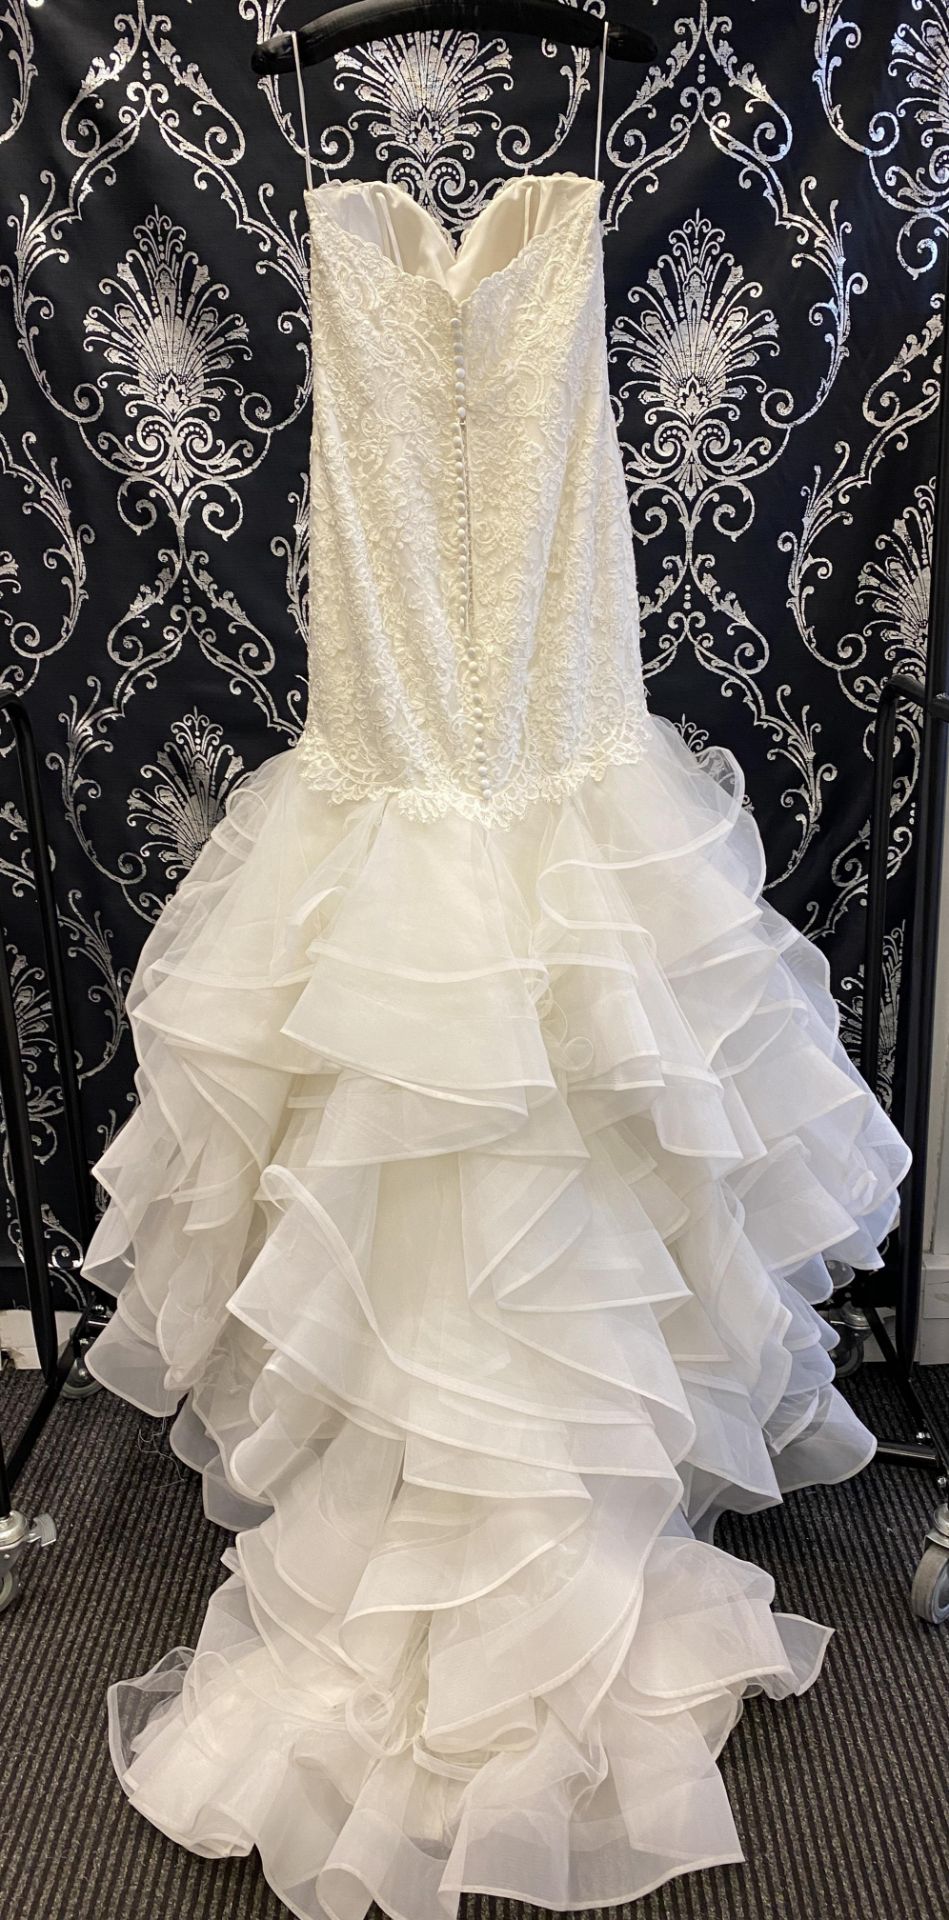 1 x MORI LEE '2879' Exceptional Strapless Lace Mermaid Style Designer Wedding Dress RRP £1,650 UK12 - Image 2 of 10